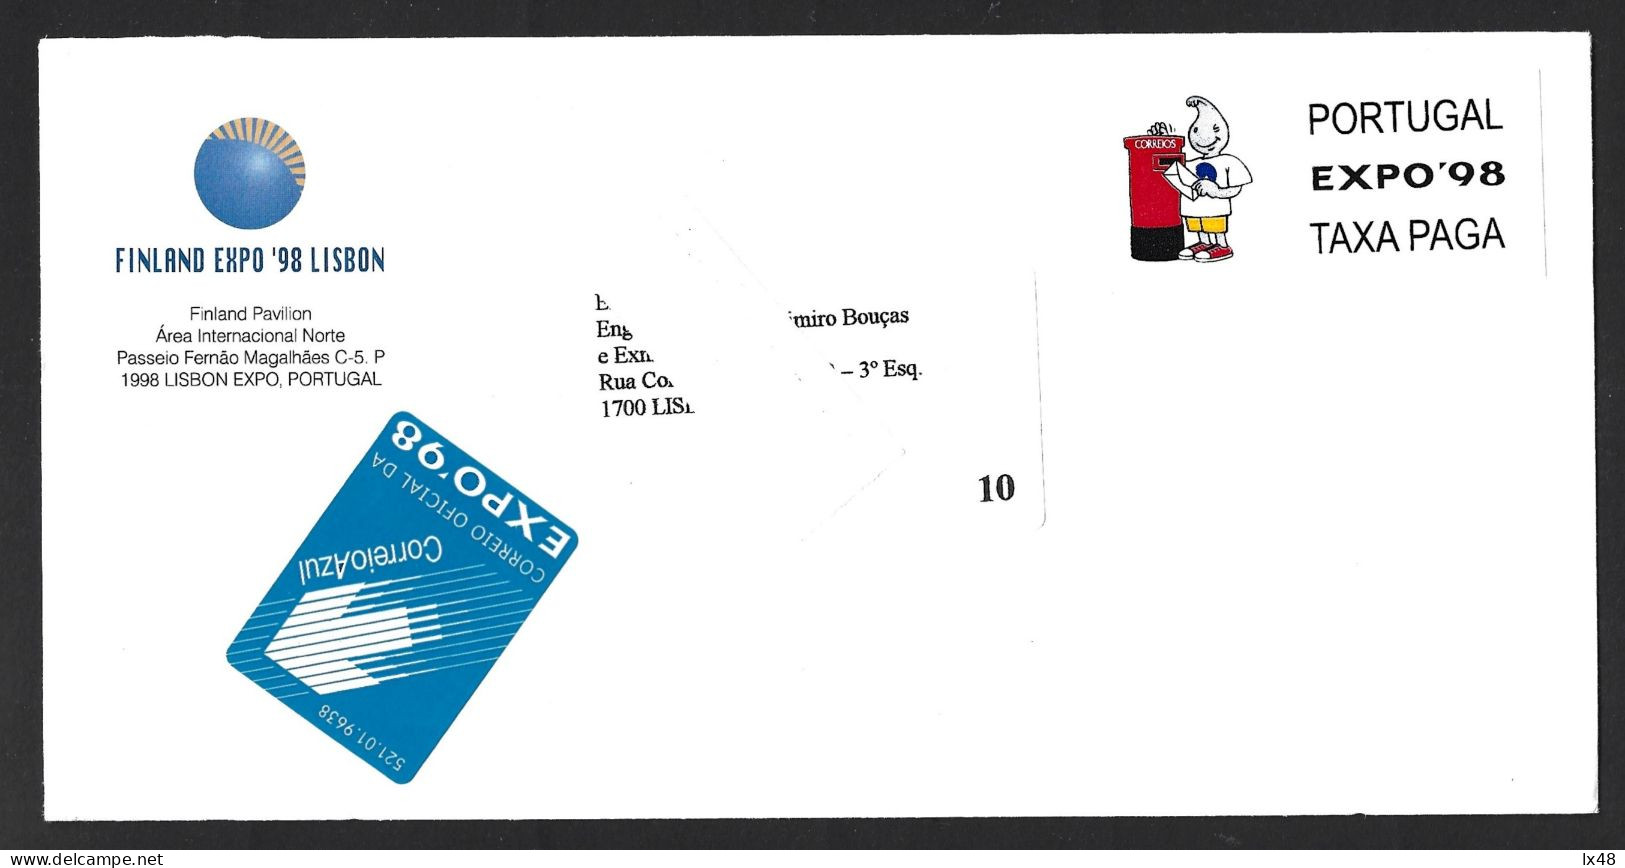 Rare EXPO'98 Fee-paid Letter From The Finland Expo'98 Lisbon 1998 Pavilion. Expo'98 Blue Mail. Gil With Postmark. - Briefe U. Dokumente